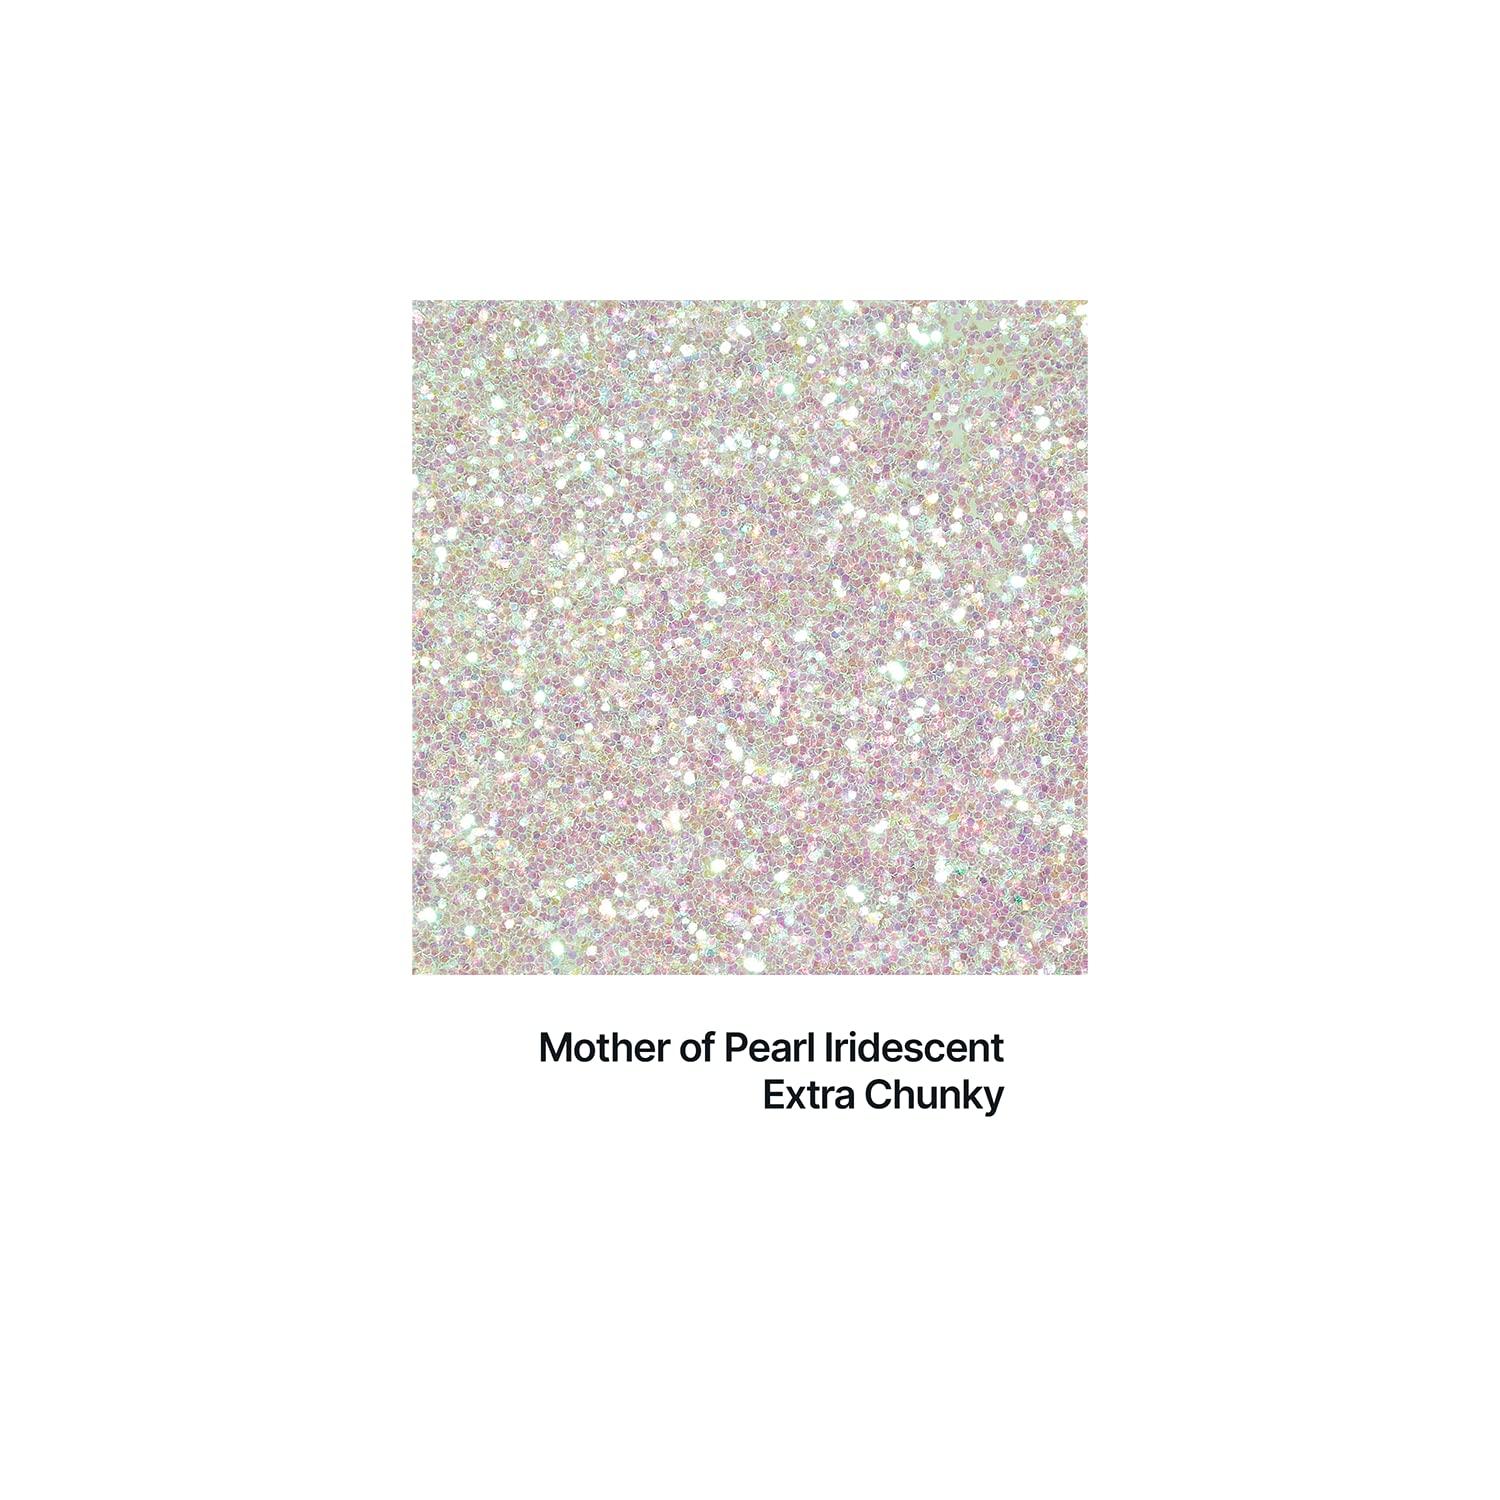 Eco-Friendly Glitter | Biodegradable | 4 Colors | Safe | Quality